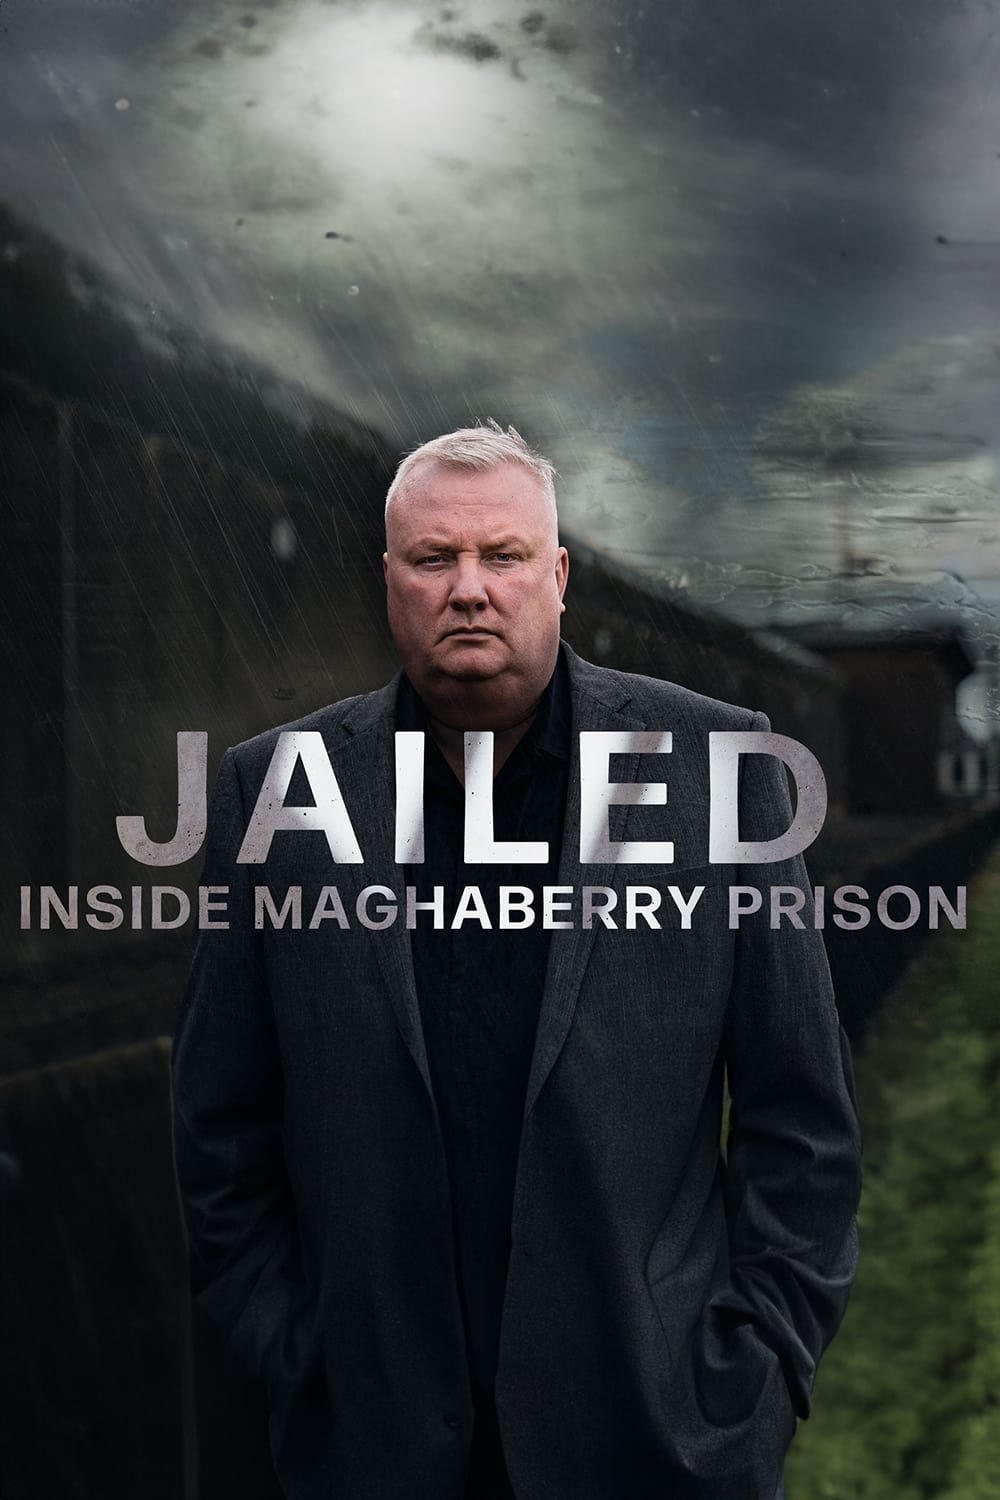 Jailed: Inside Maghaberry Prison